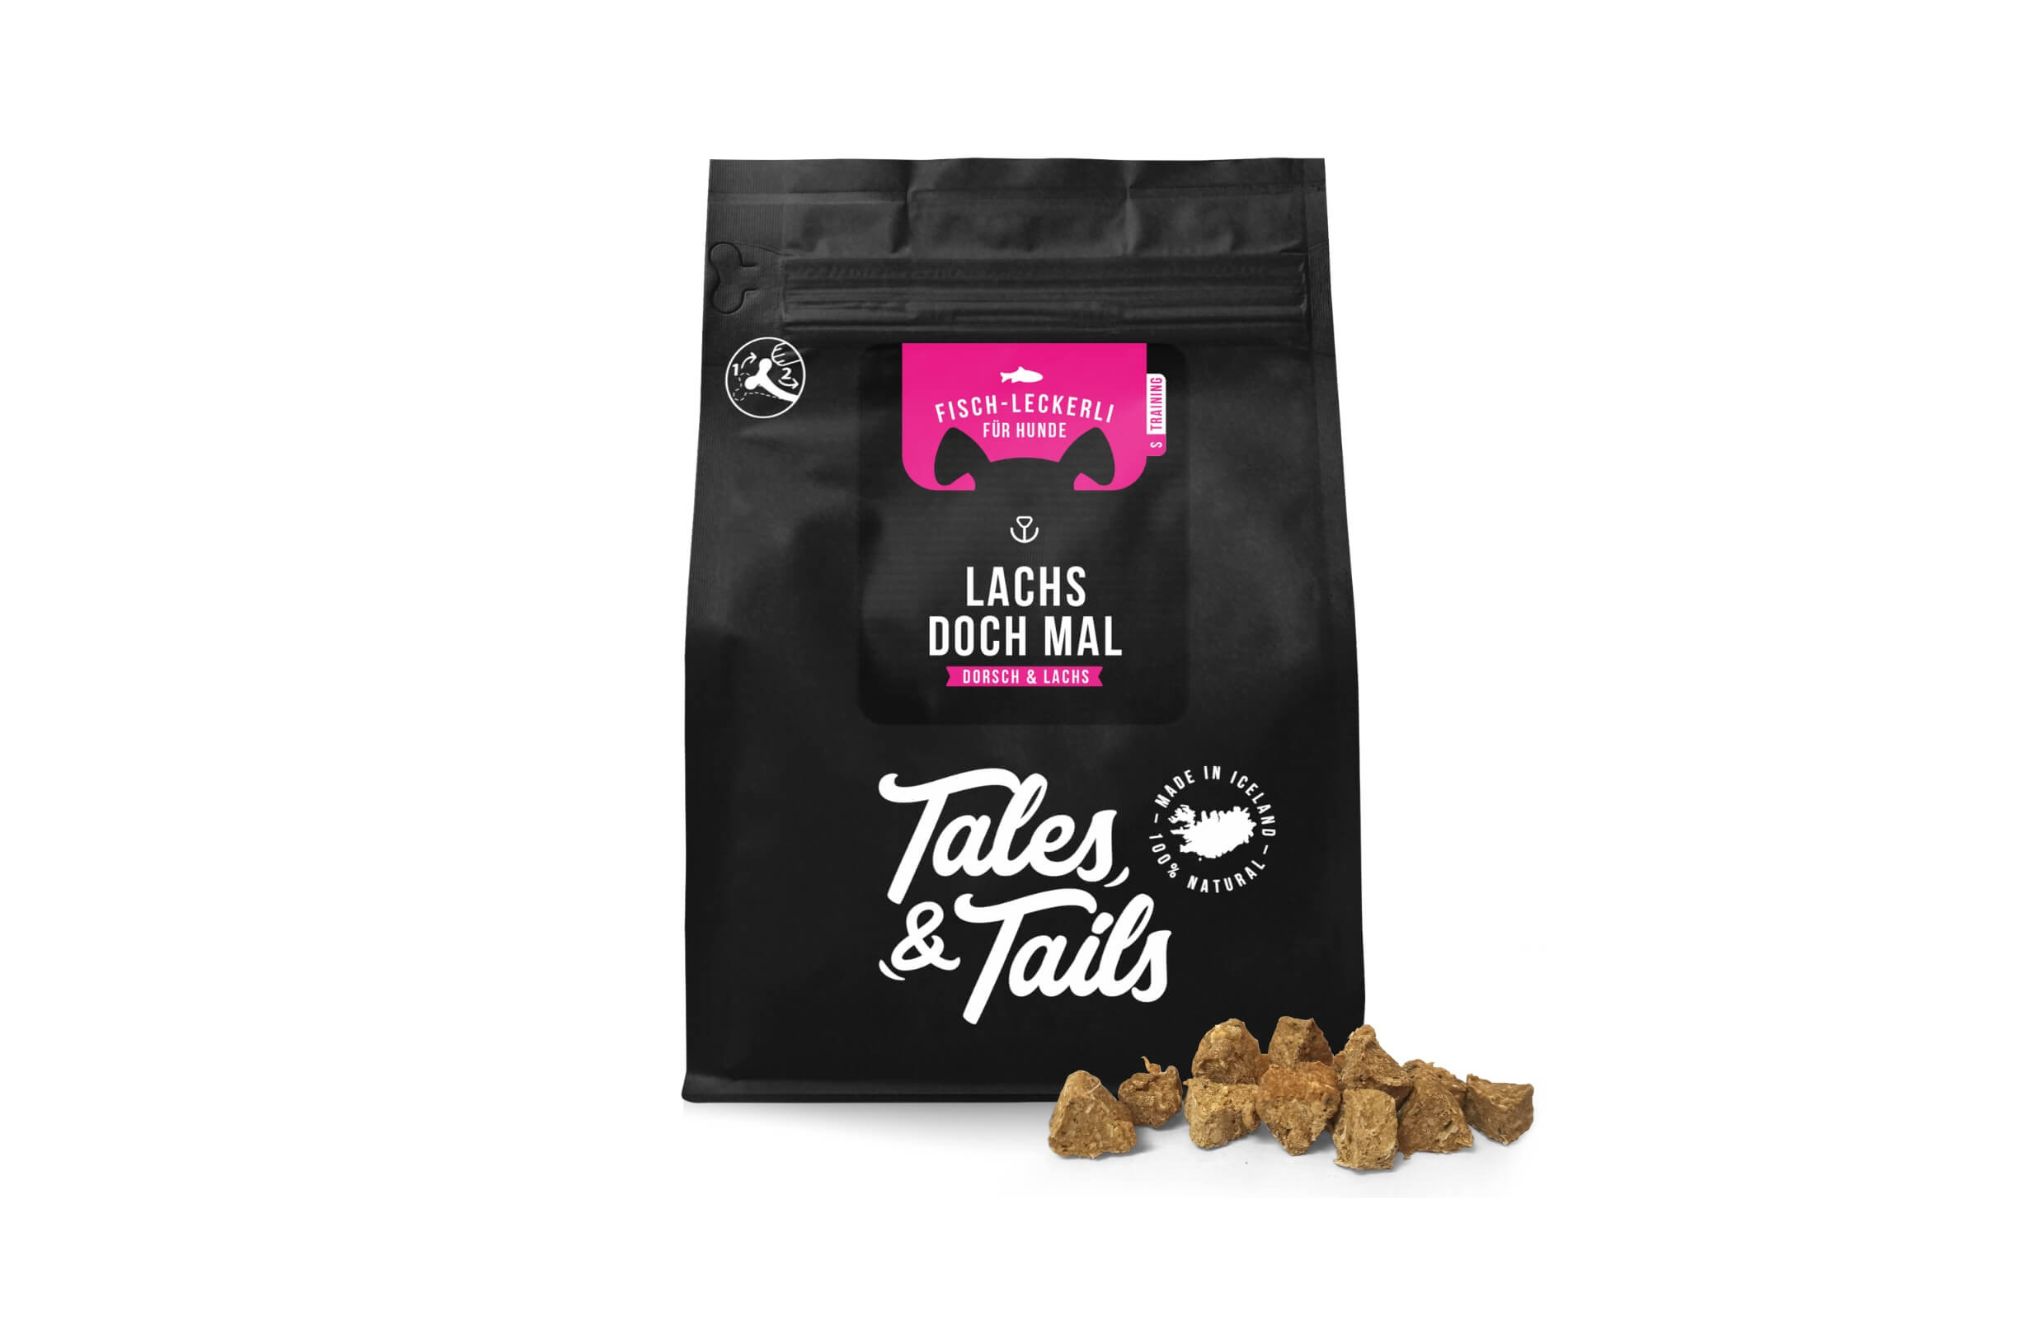 Tales&Tails Lachs doch mal